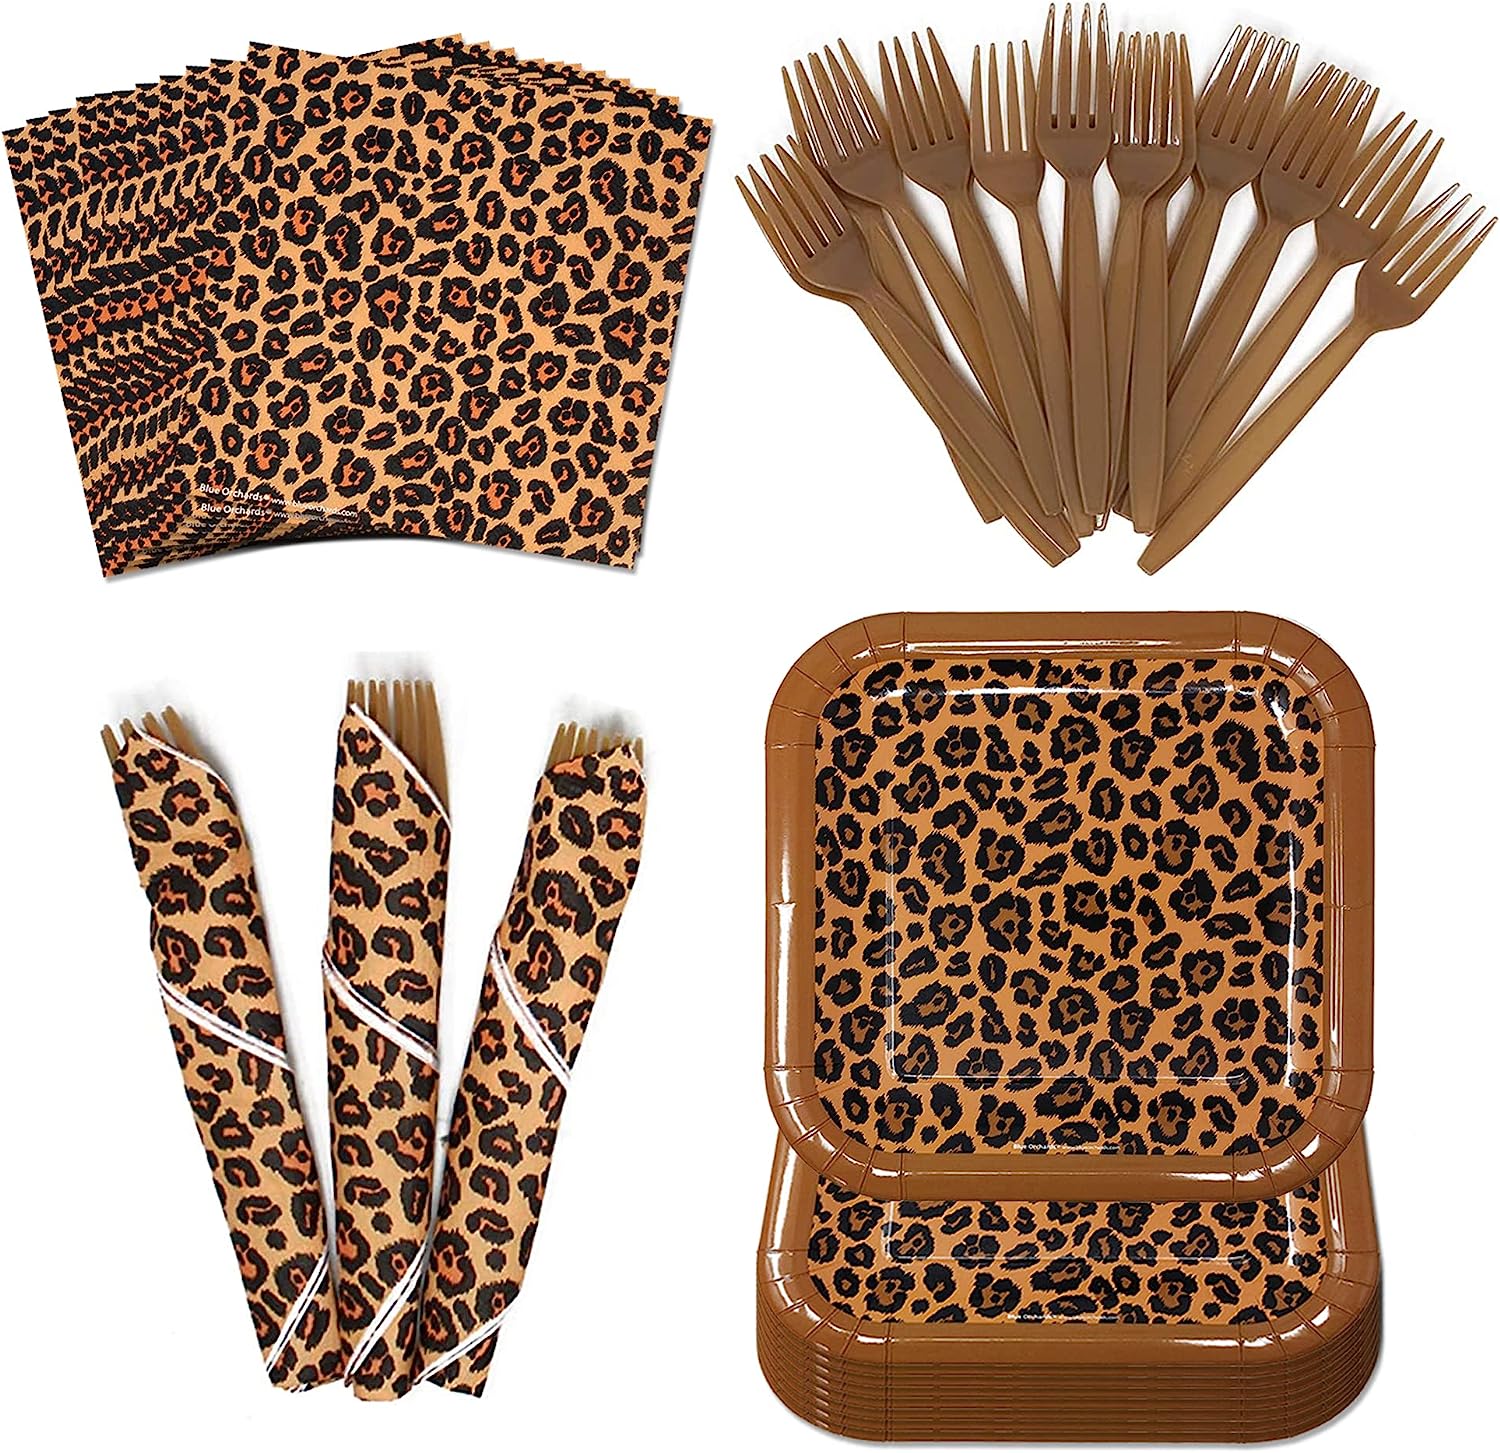 Leopard Print Party Supplies Pack includes 16 7-inch paper dessert plates, 20 paper lunch napkins and plastic forks.